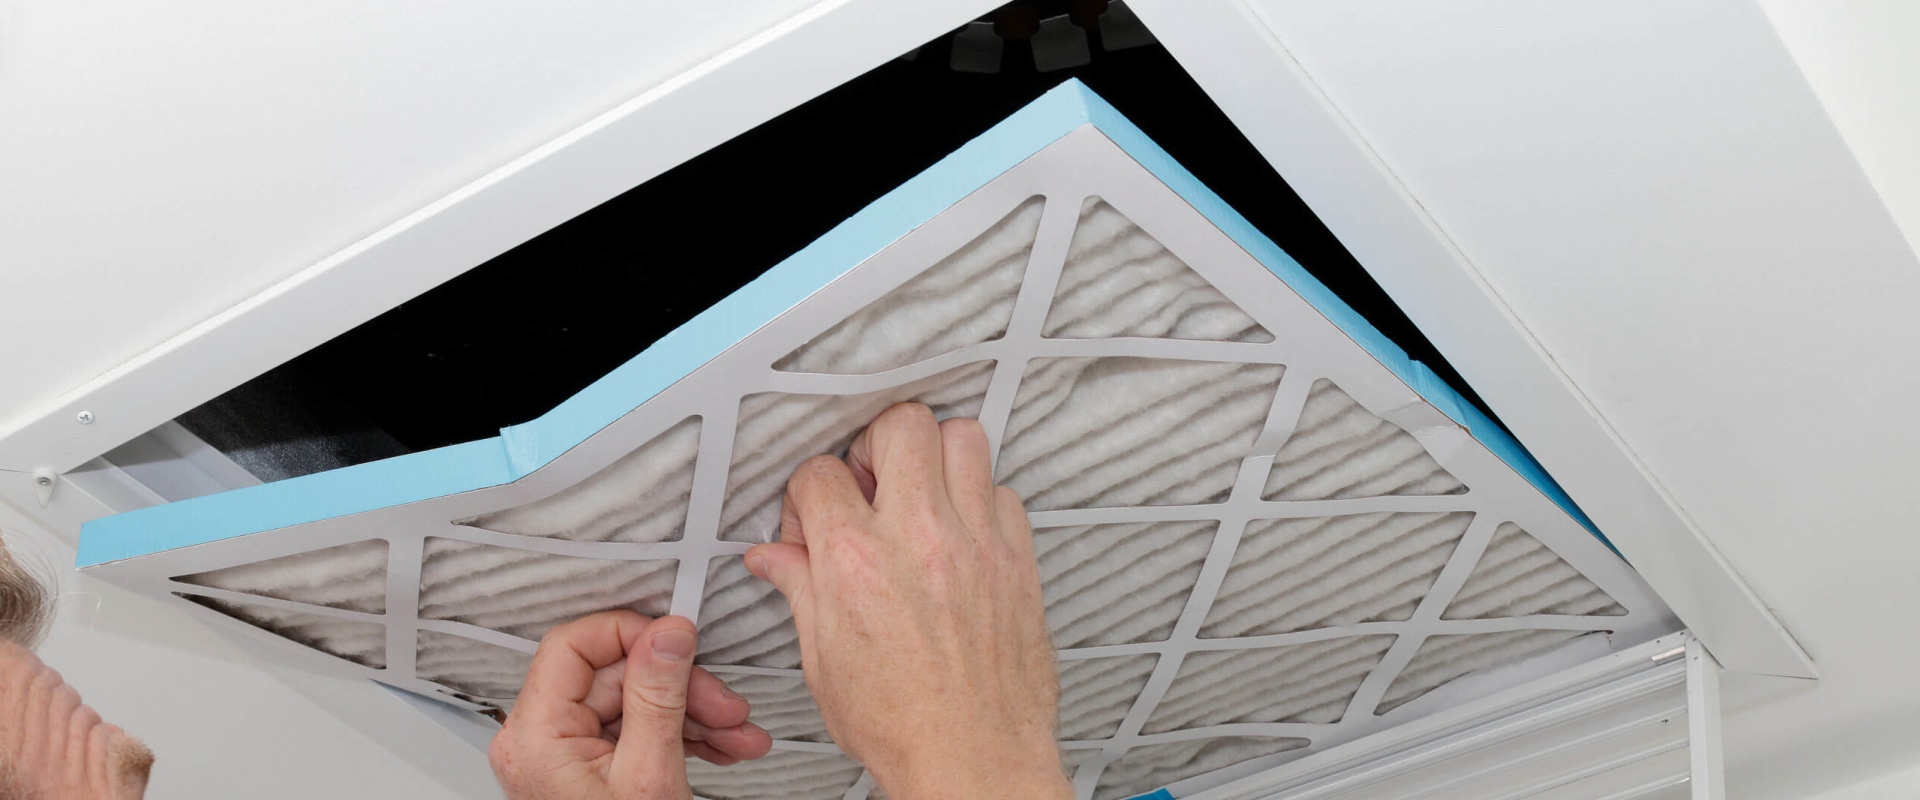 Does Thickness of Air Filter Really Matter?